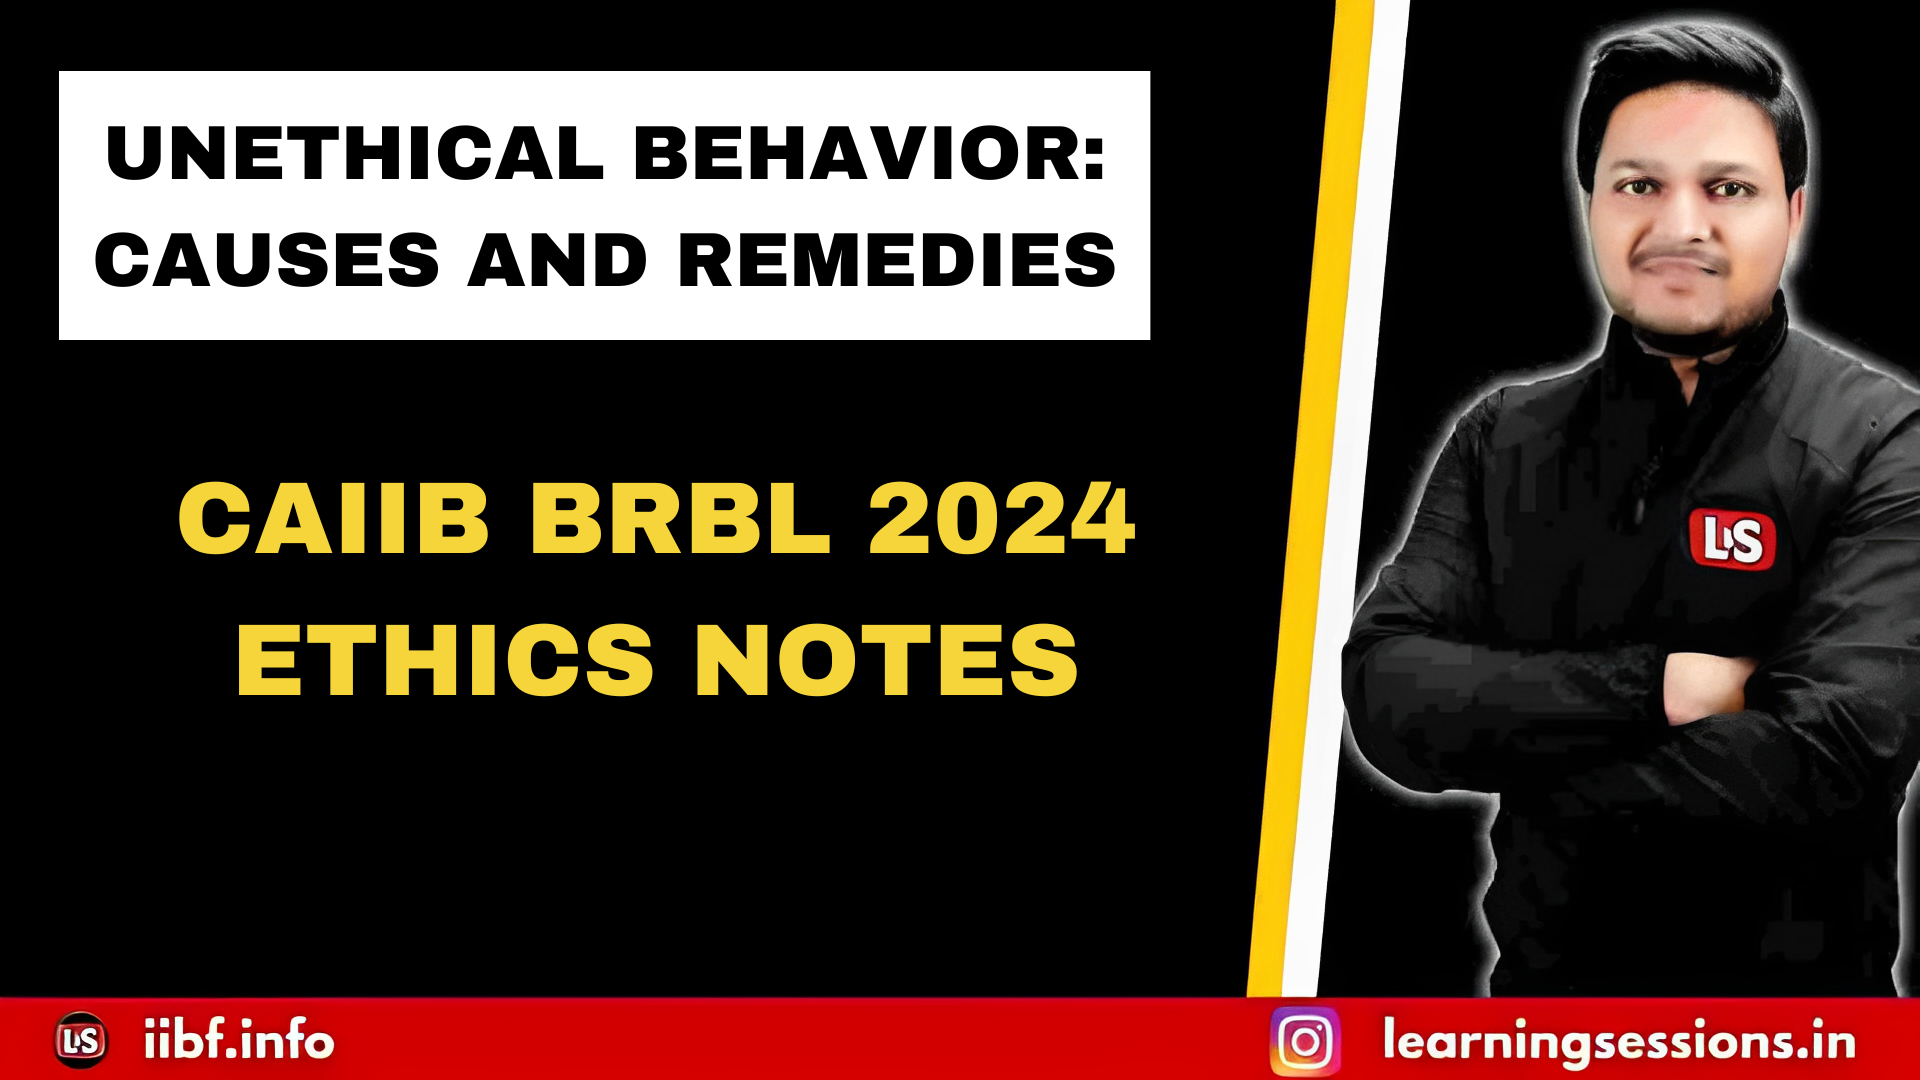 CAIIB BRBL 2024 ETHICS NOTES